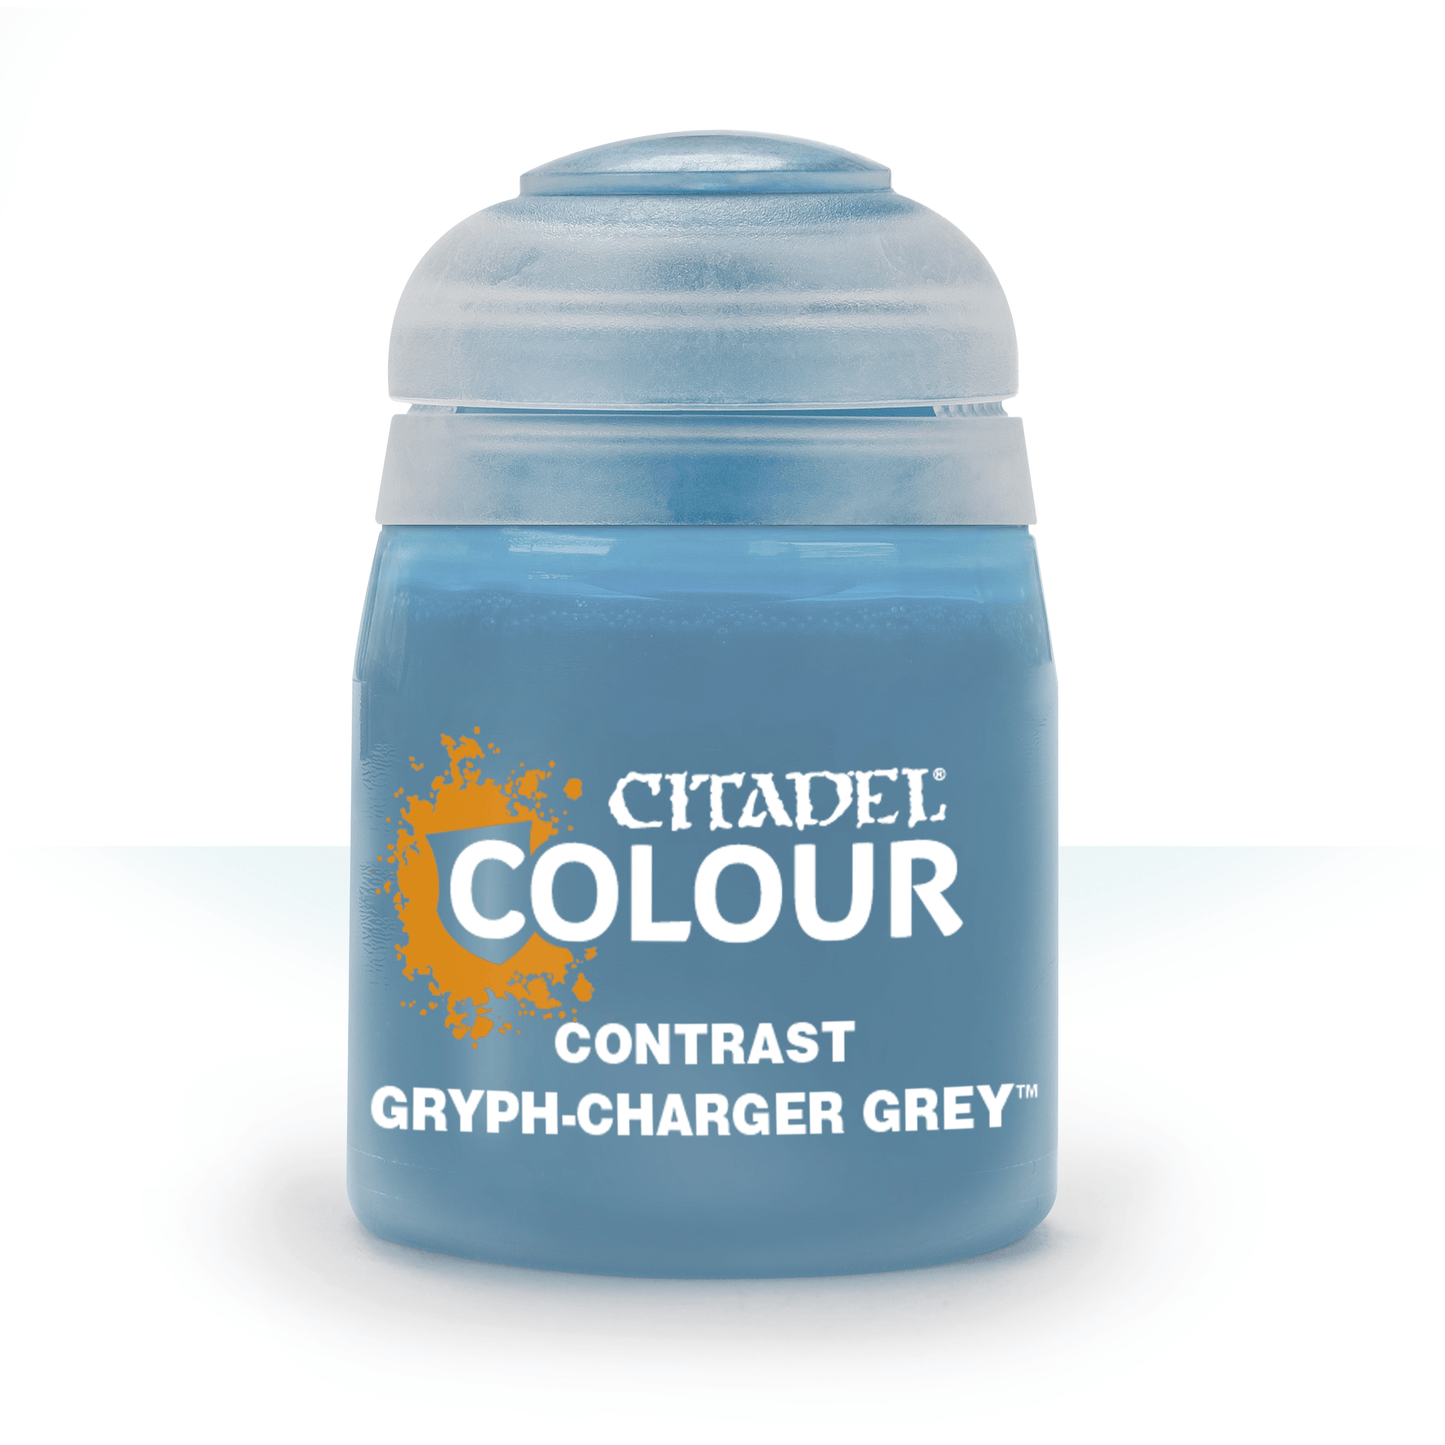 Gryph-Charger Grey | 29-35 | Contrast